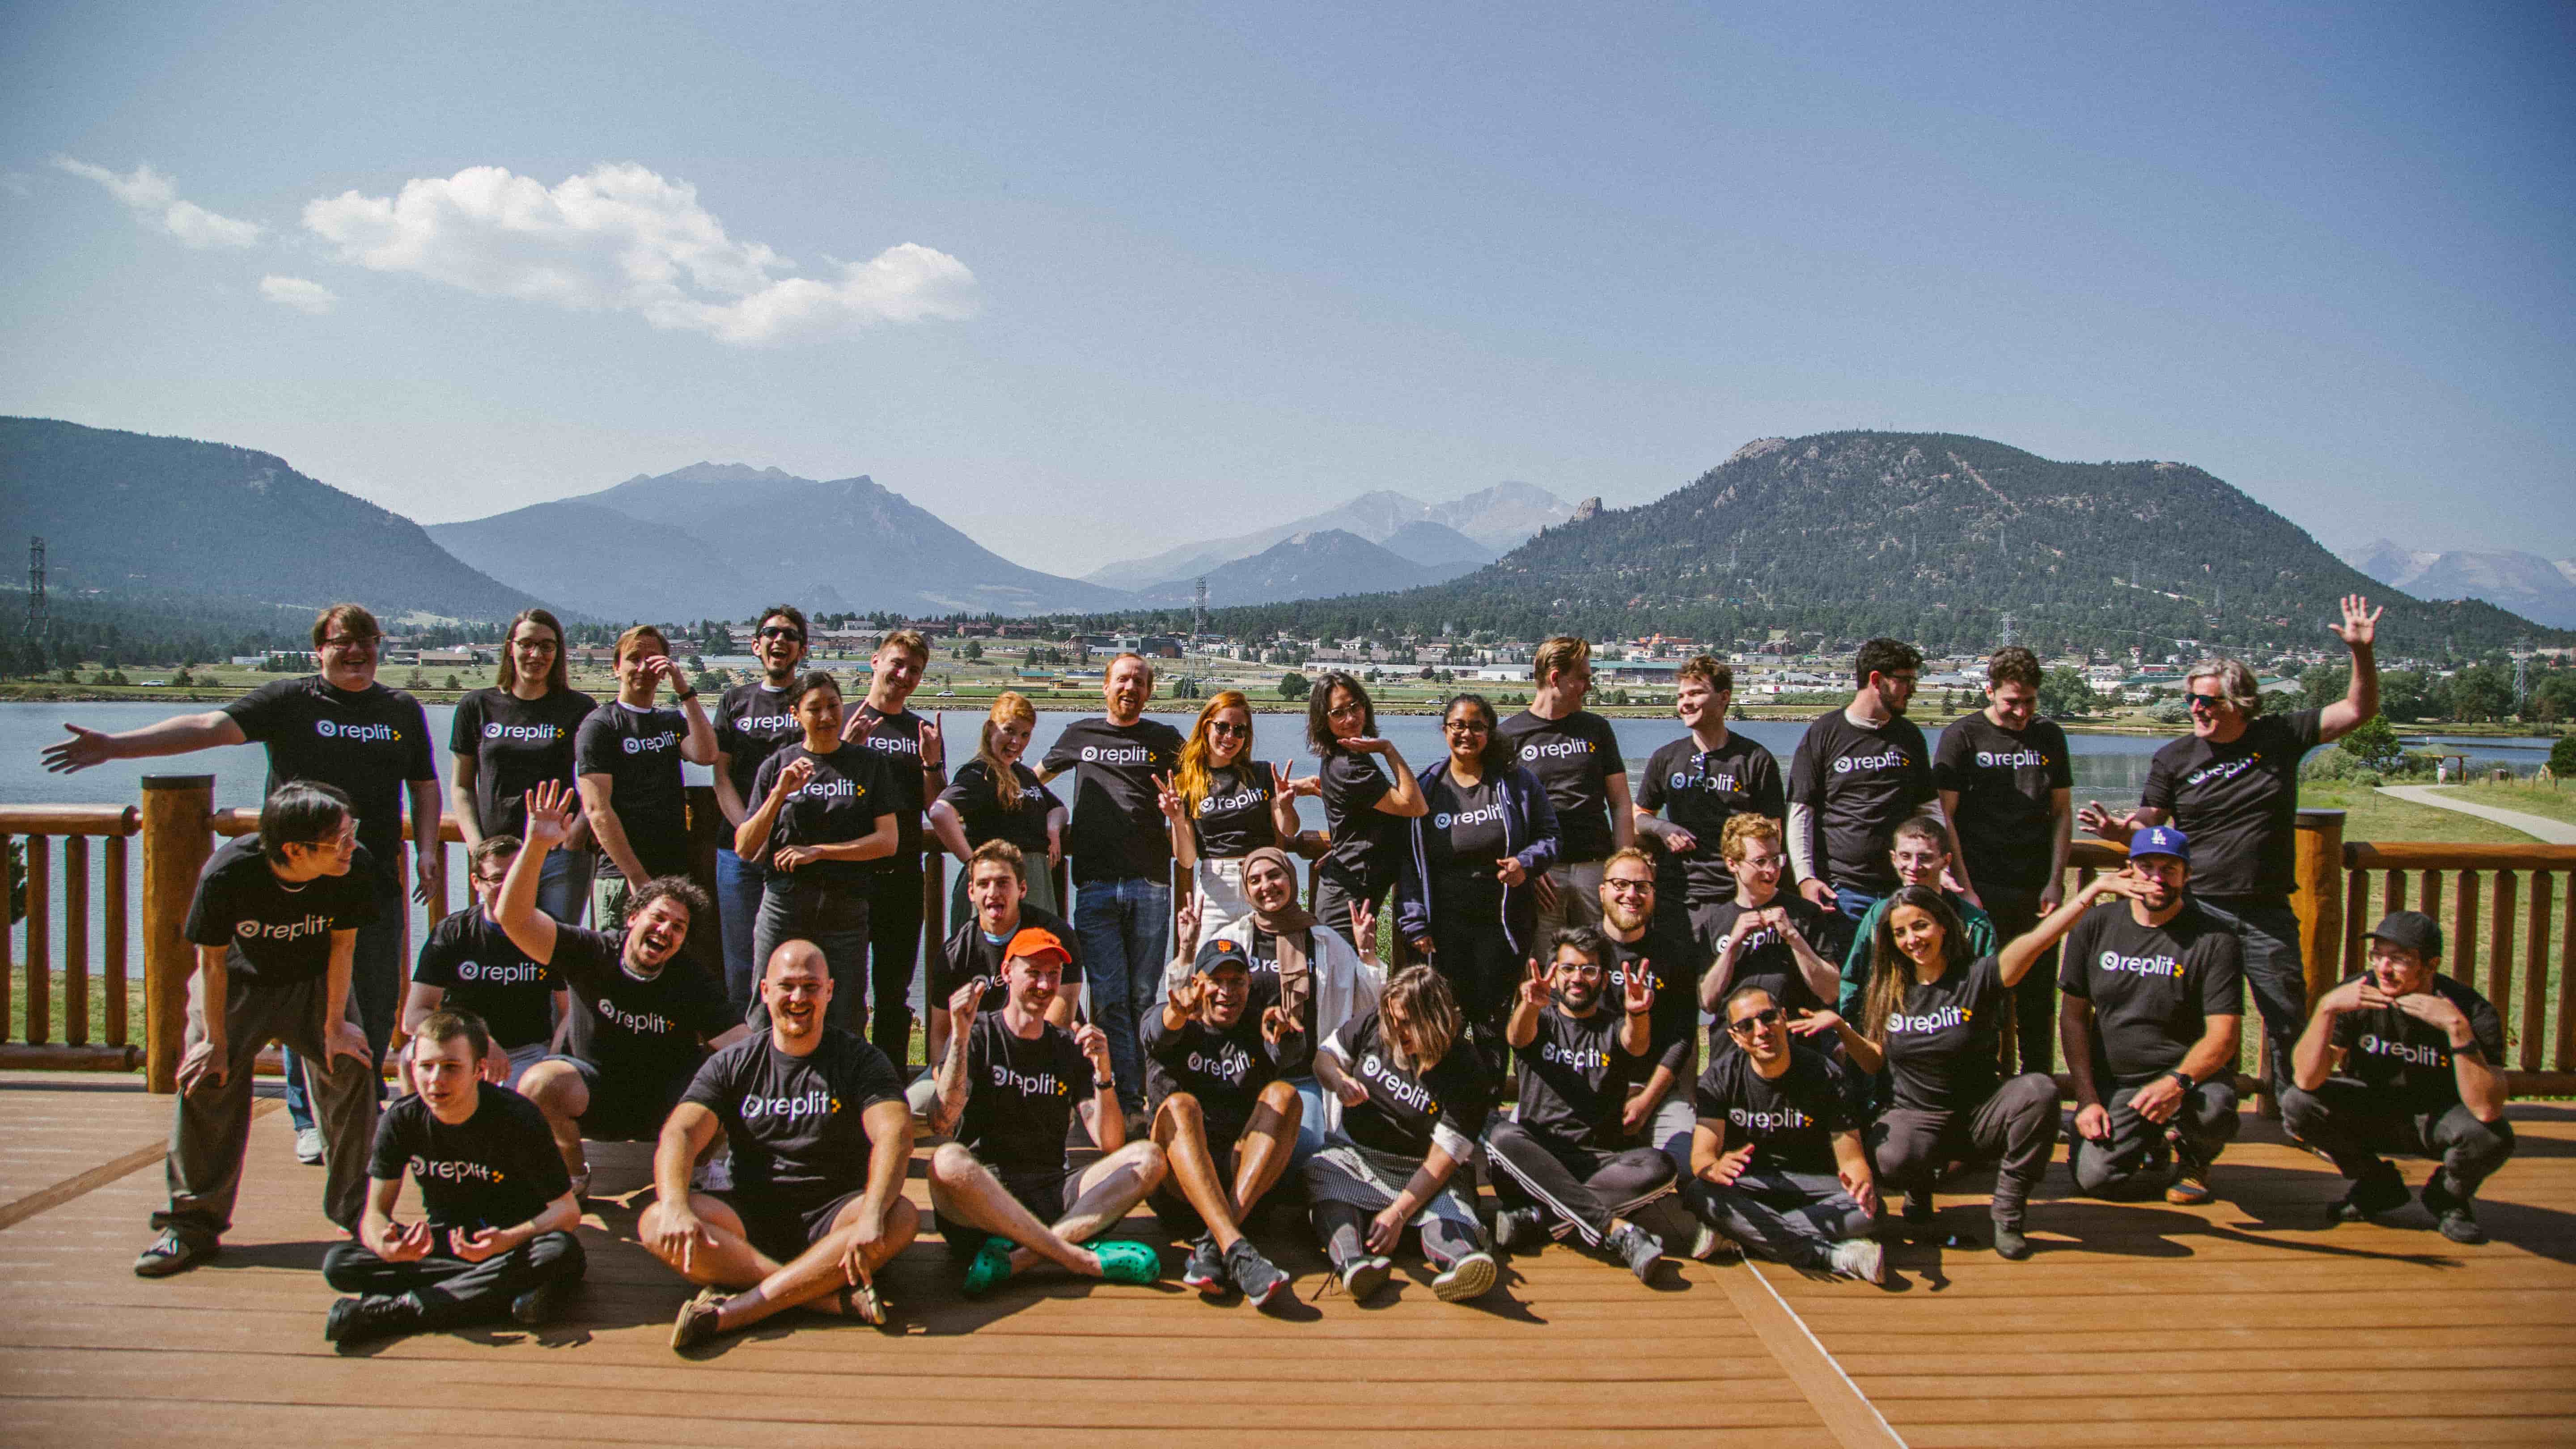 the entire Replit team together wearing company t-shirts in front of a lake in the mountains